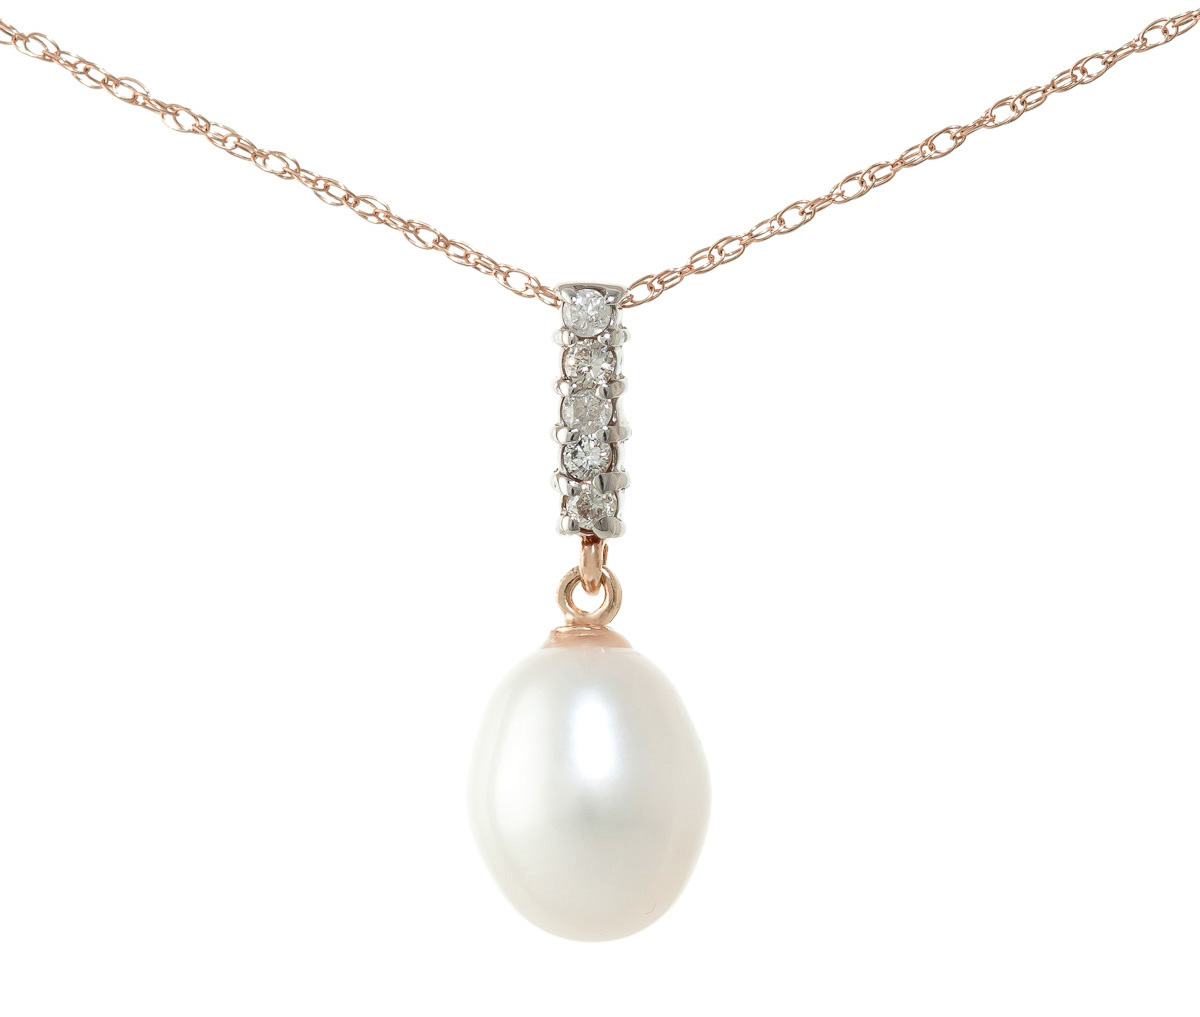 Oval Cut Pearl Pendant Necklace 4.08 ctw in 9ct Rose Gold